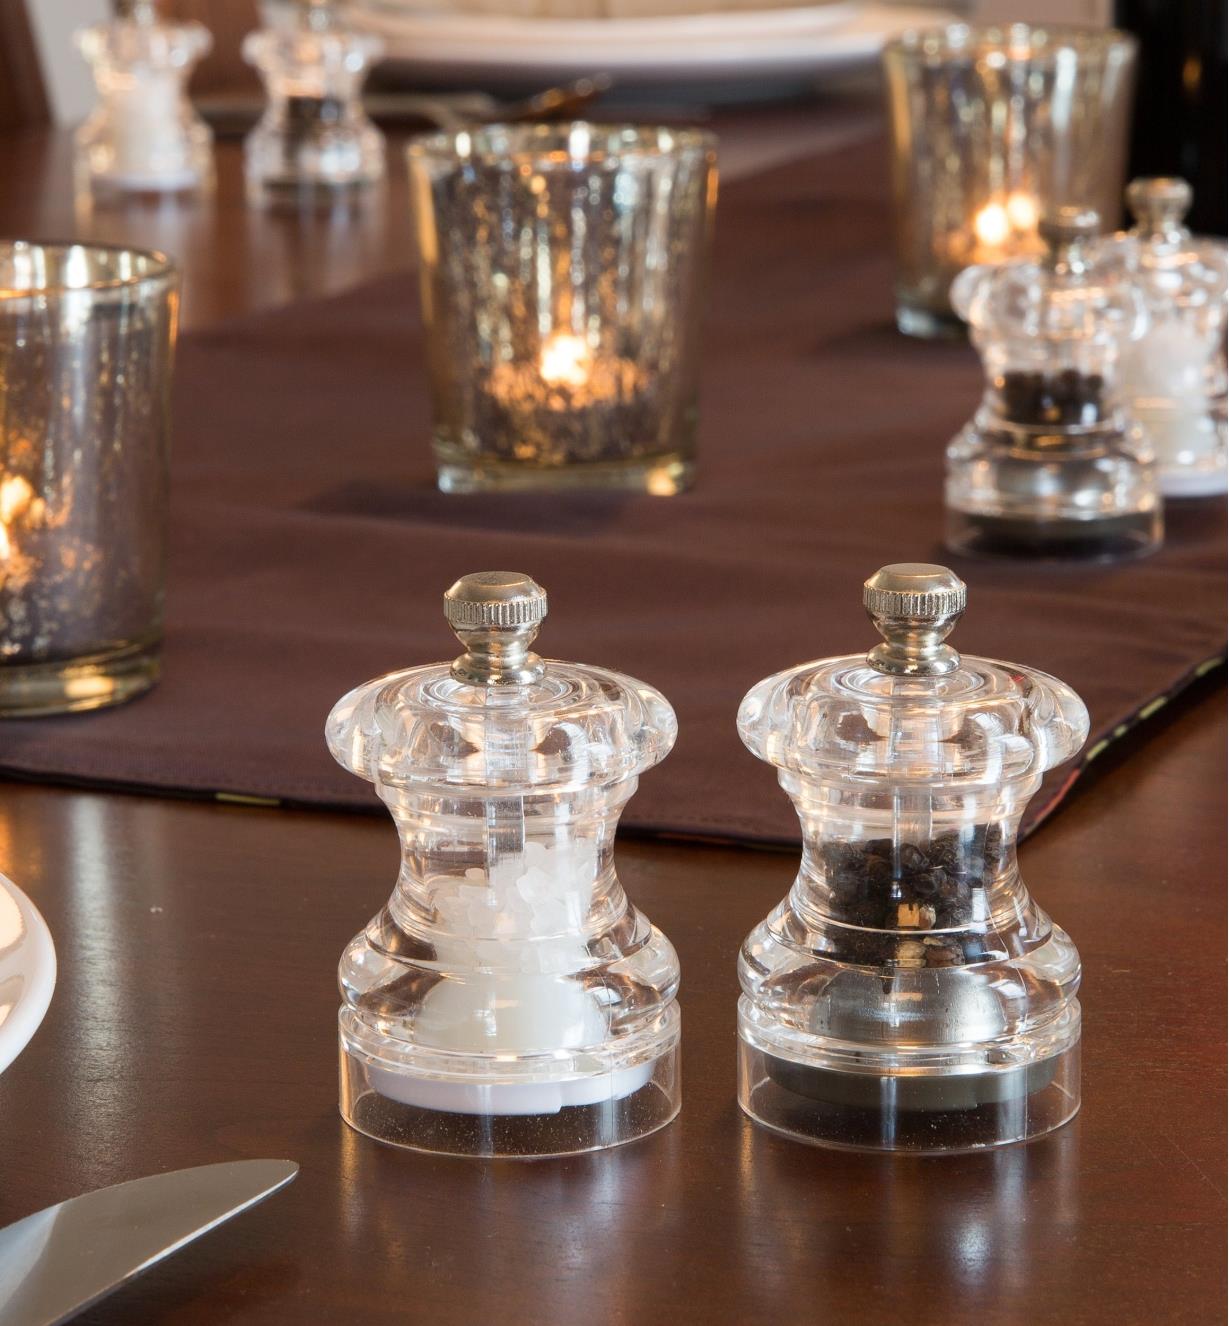 Cole & Mason Mini Salt & Pepper Mills on a dining table with candles behind